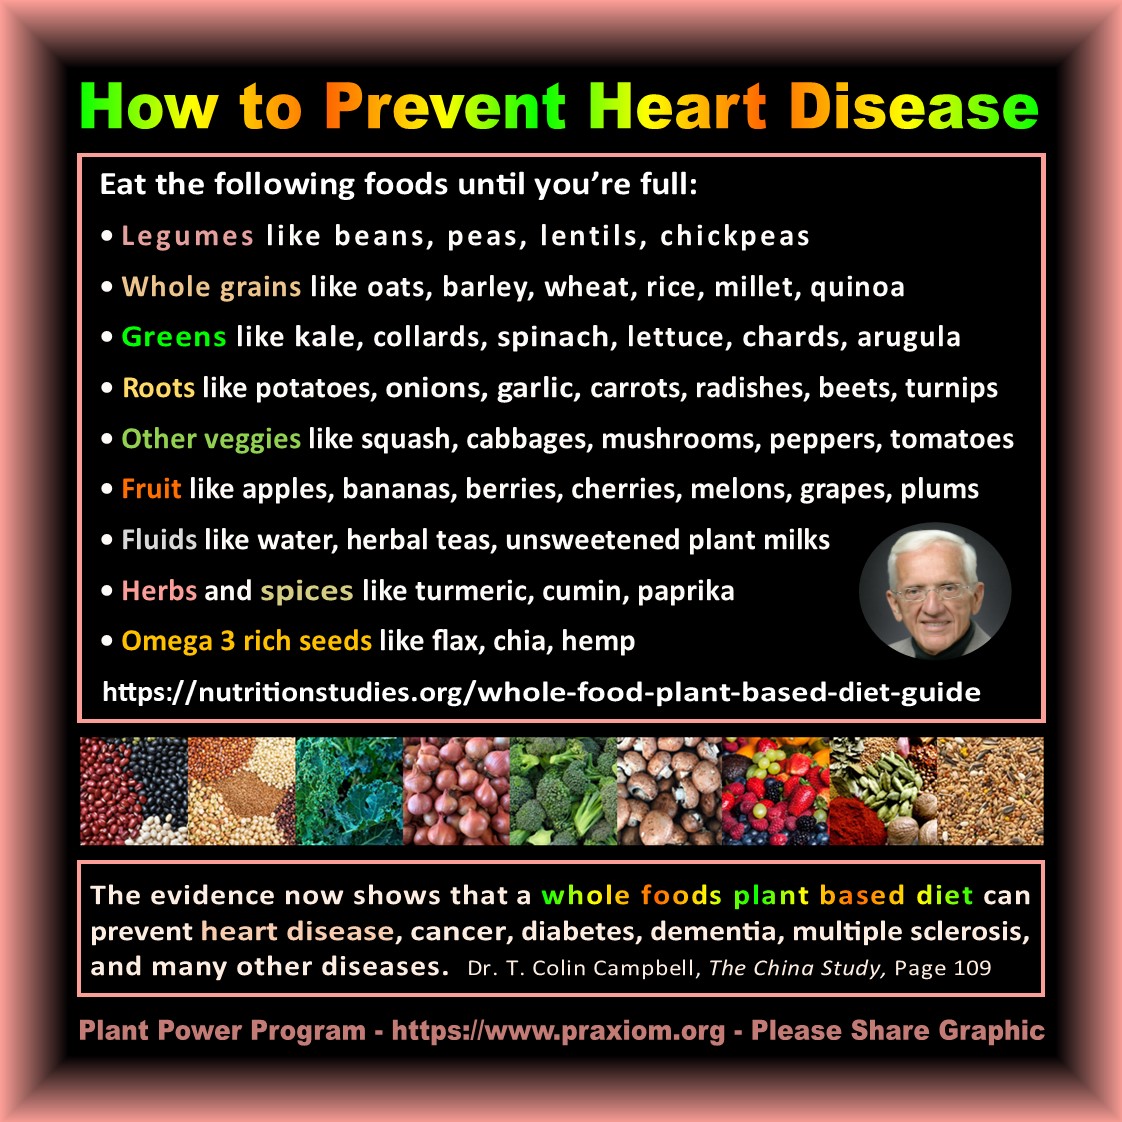 How to Prevent Heart Disease - Dr. T. Colin Campbell